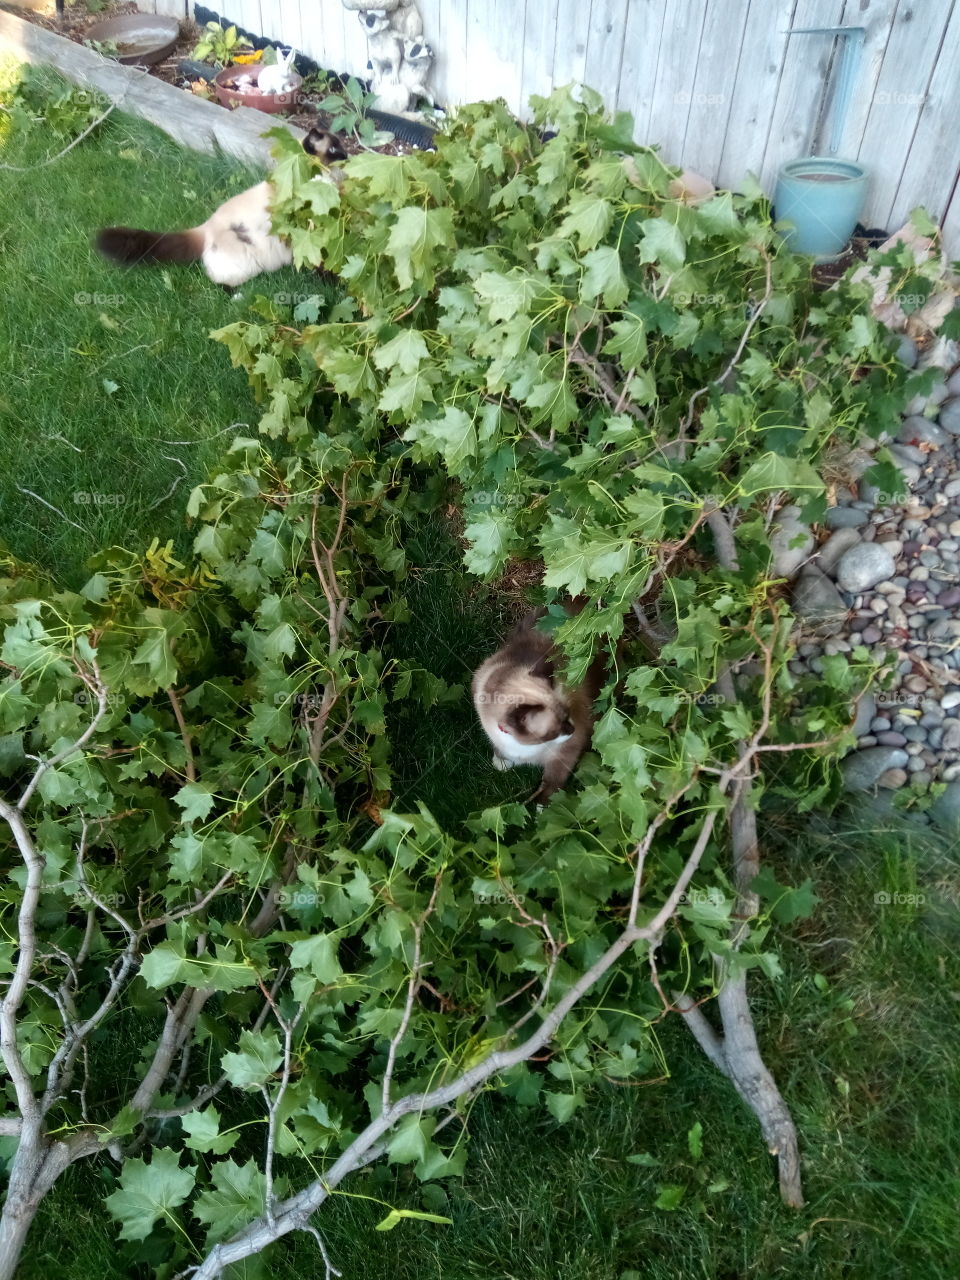 Cats playing in the down branches